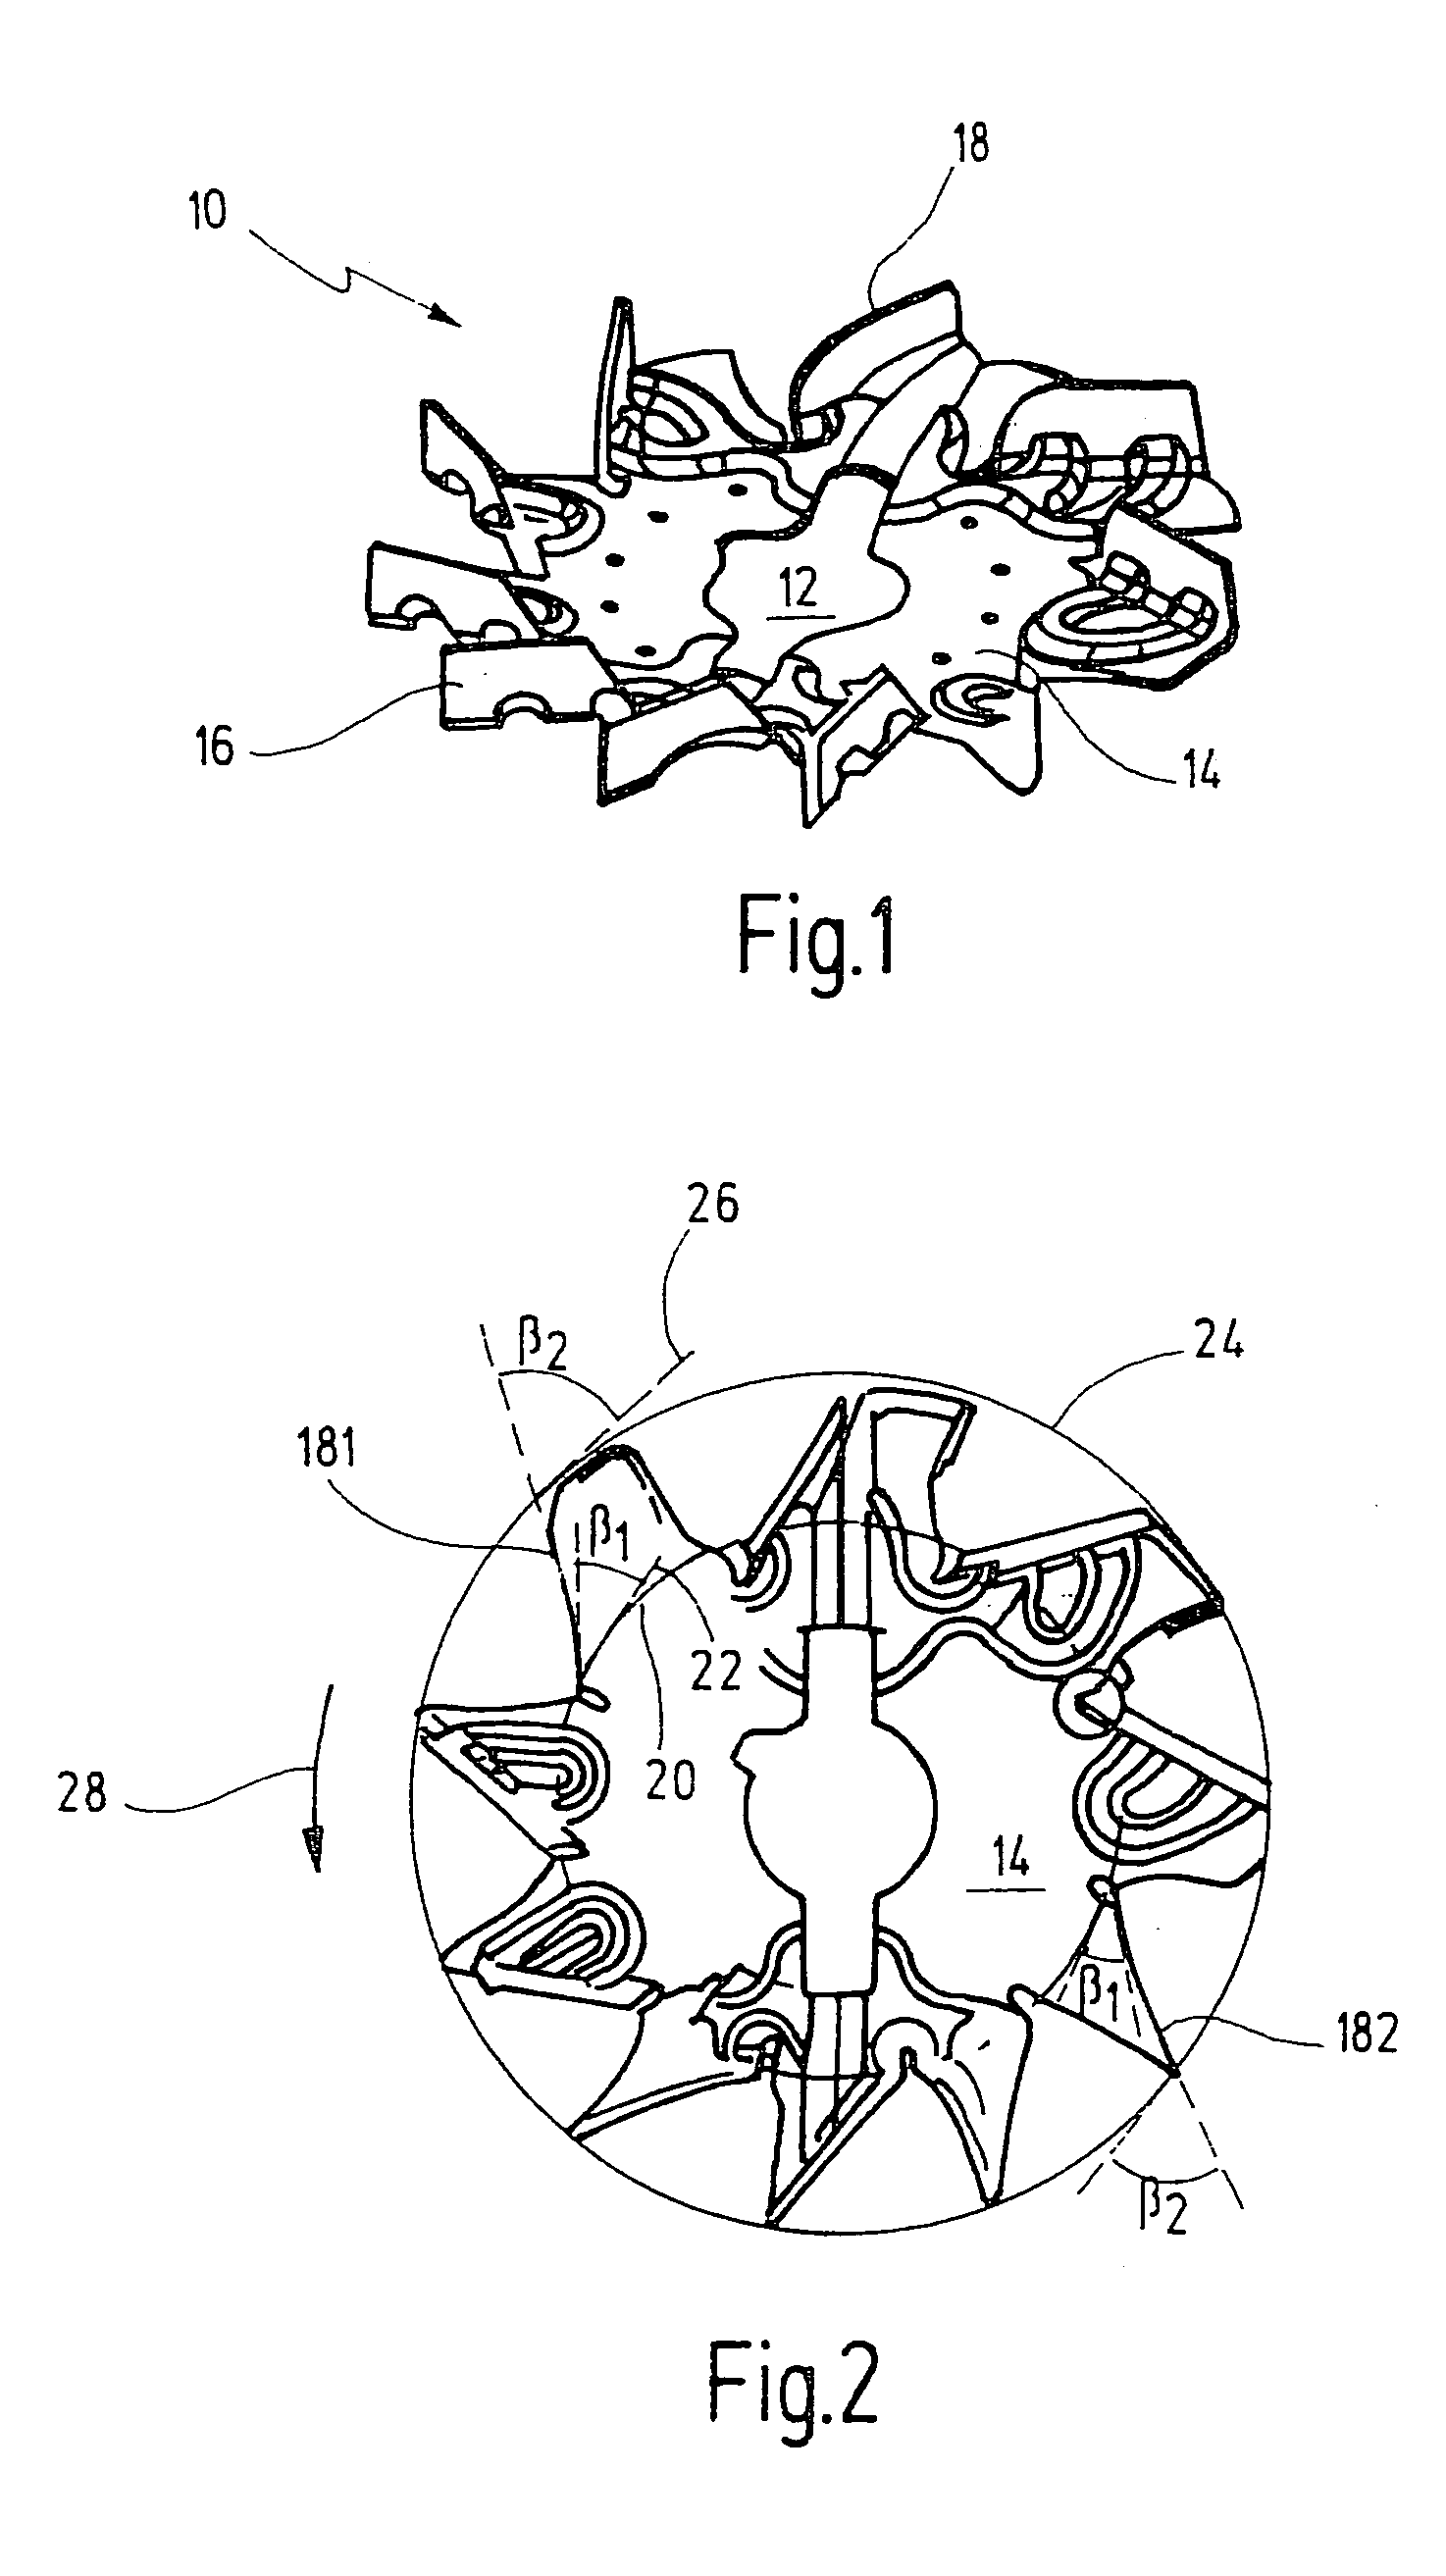 Radial fan wheel for transporting cooling air for an electric machine